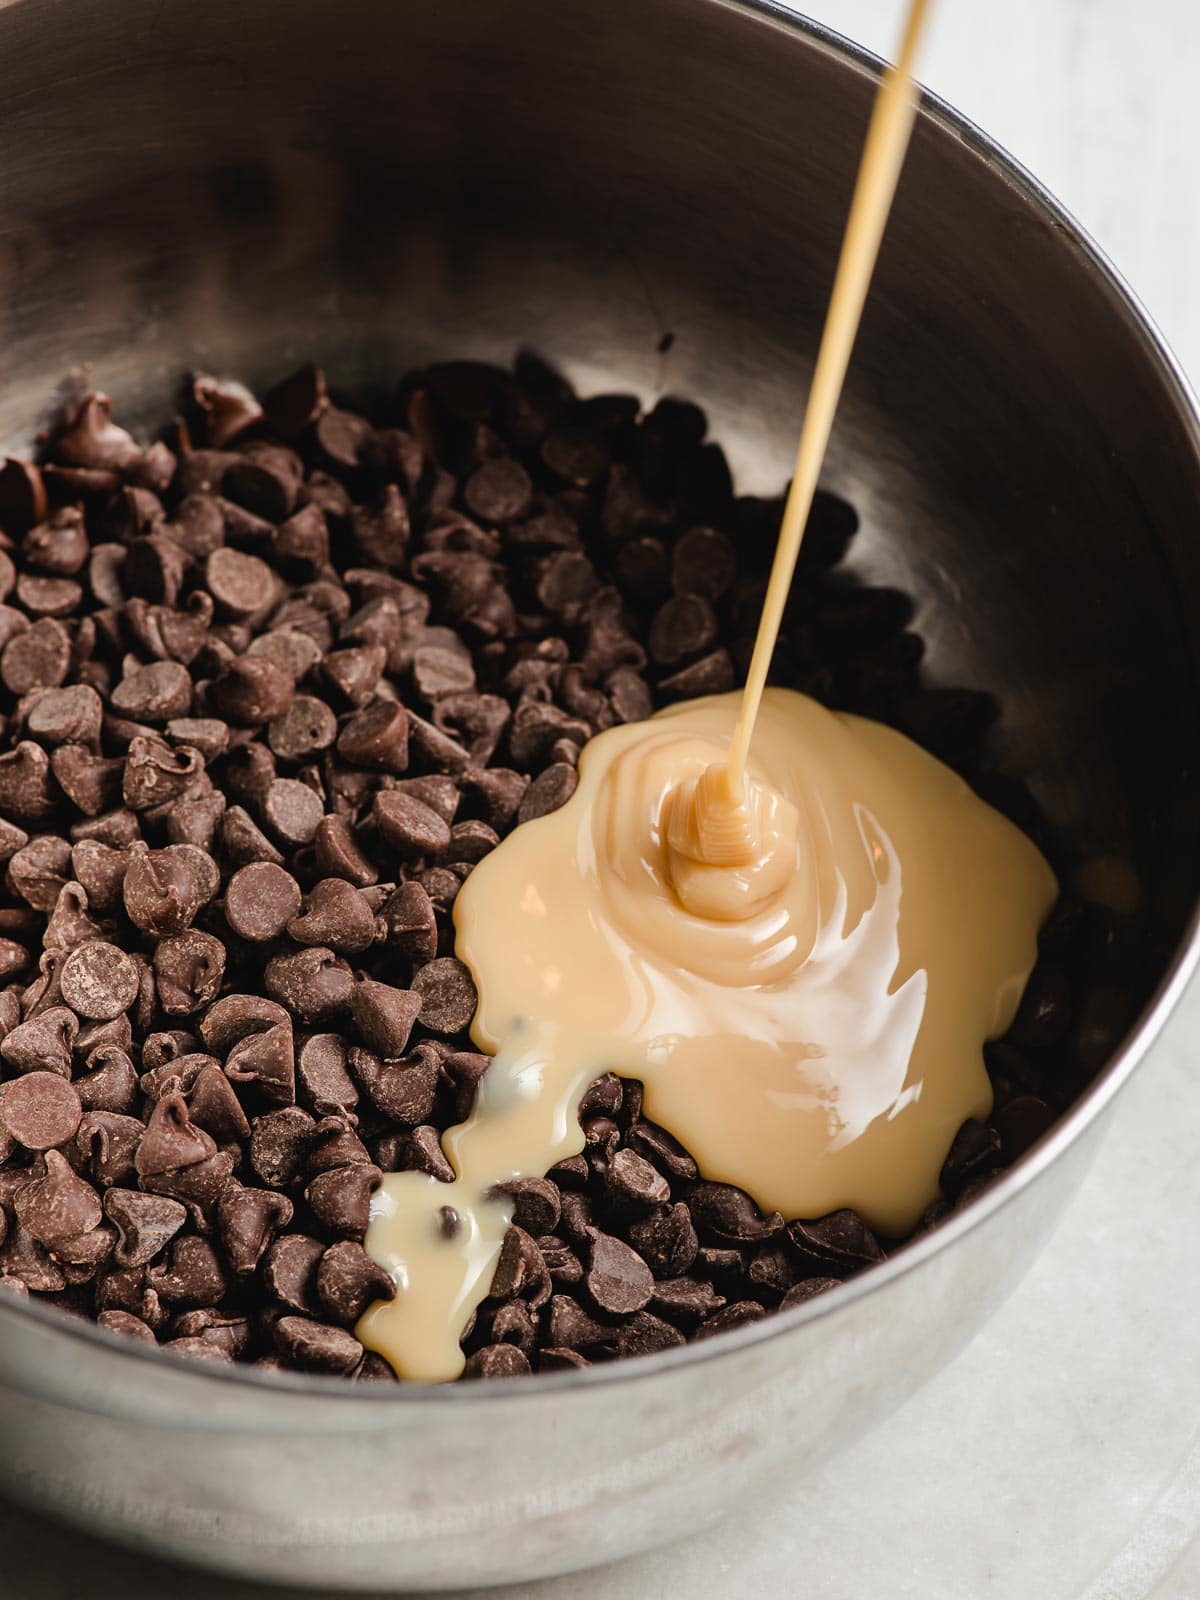 Sweetened condensed milk being poured into a bowl of chocolate chips.